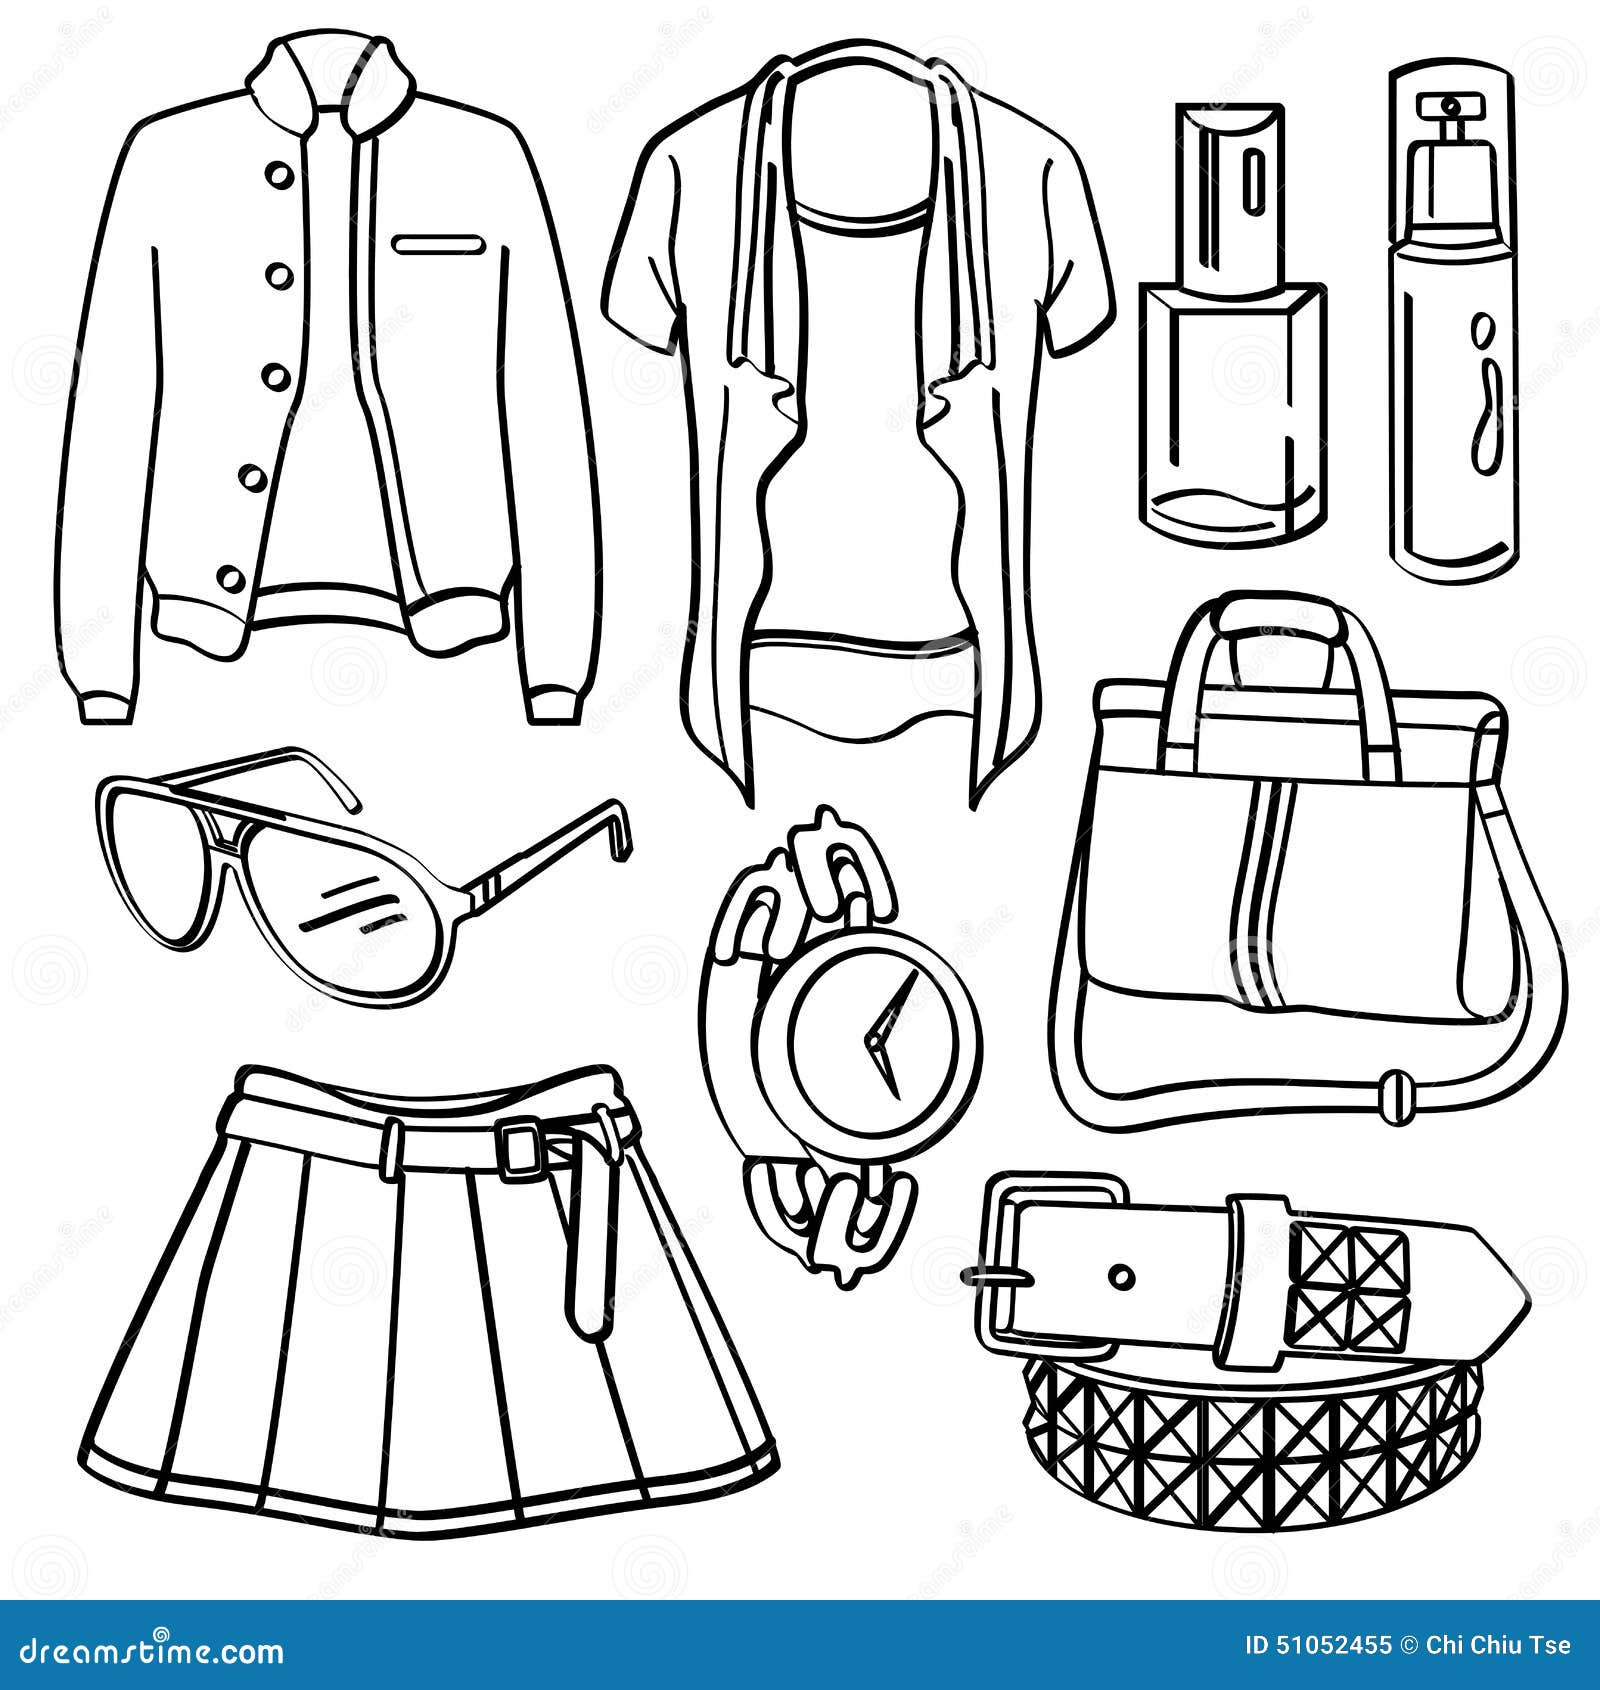 Clothing and Accessories stock illustration. Illustration of black ...